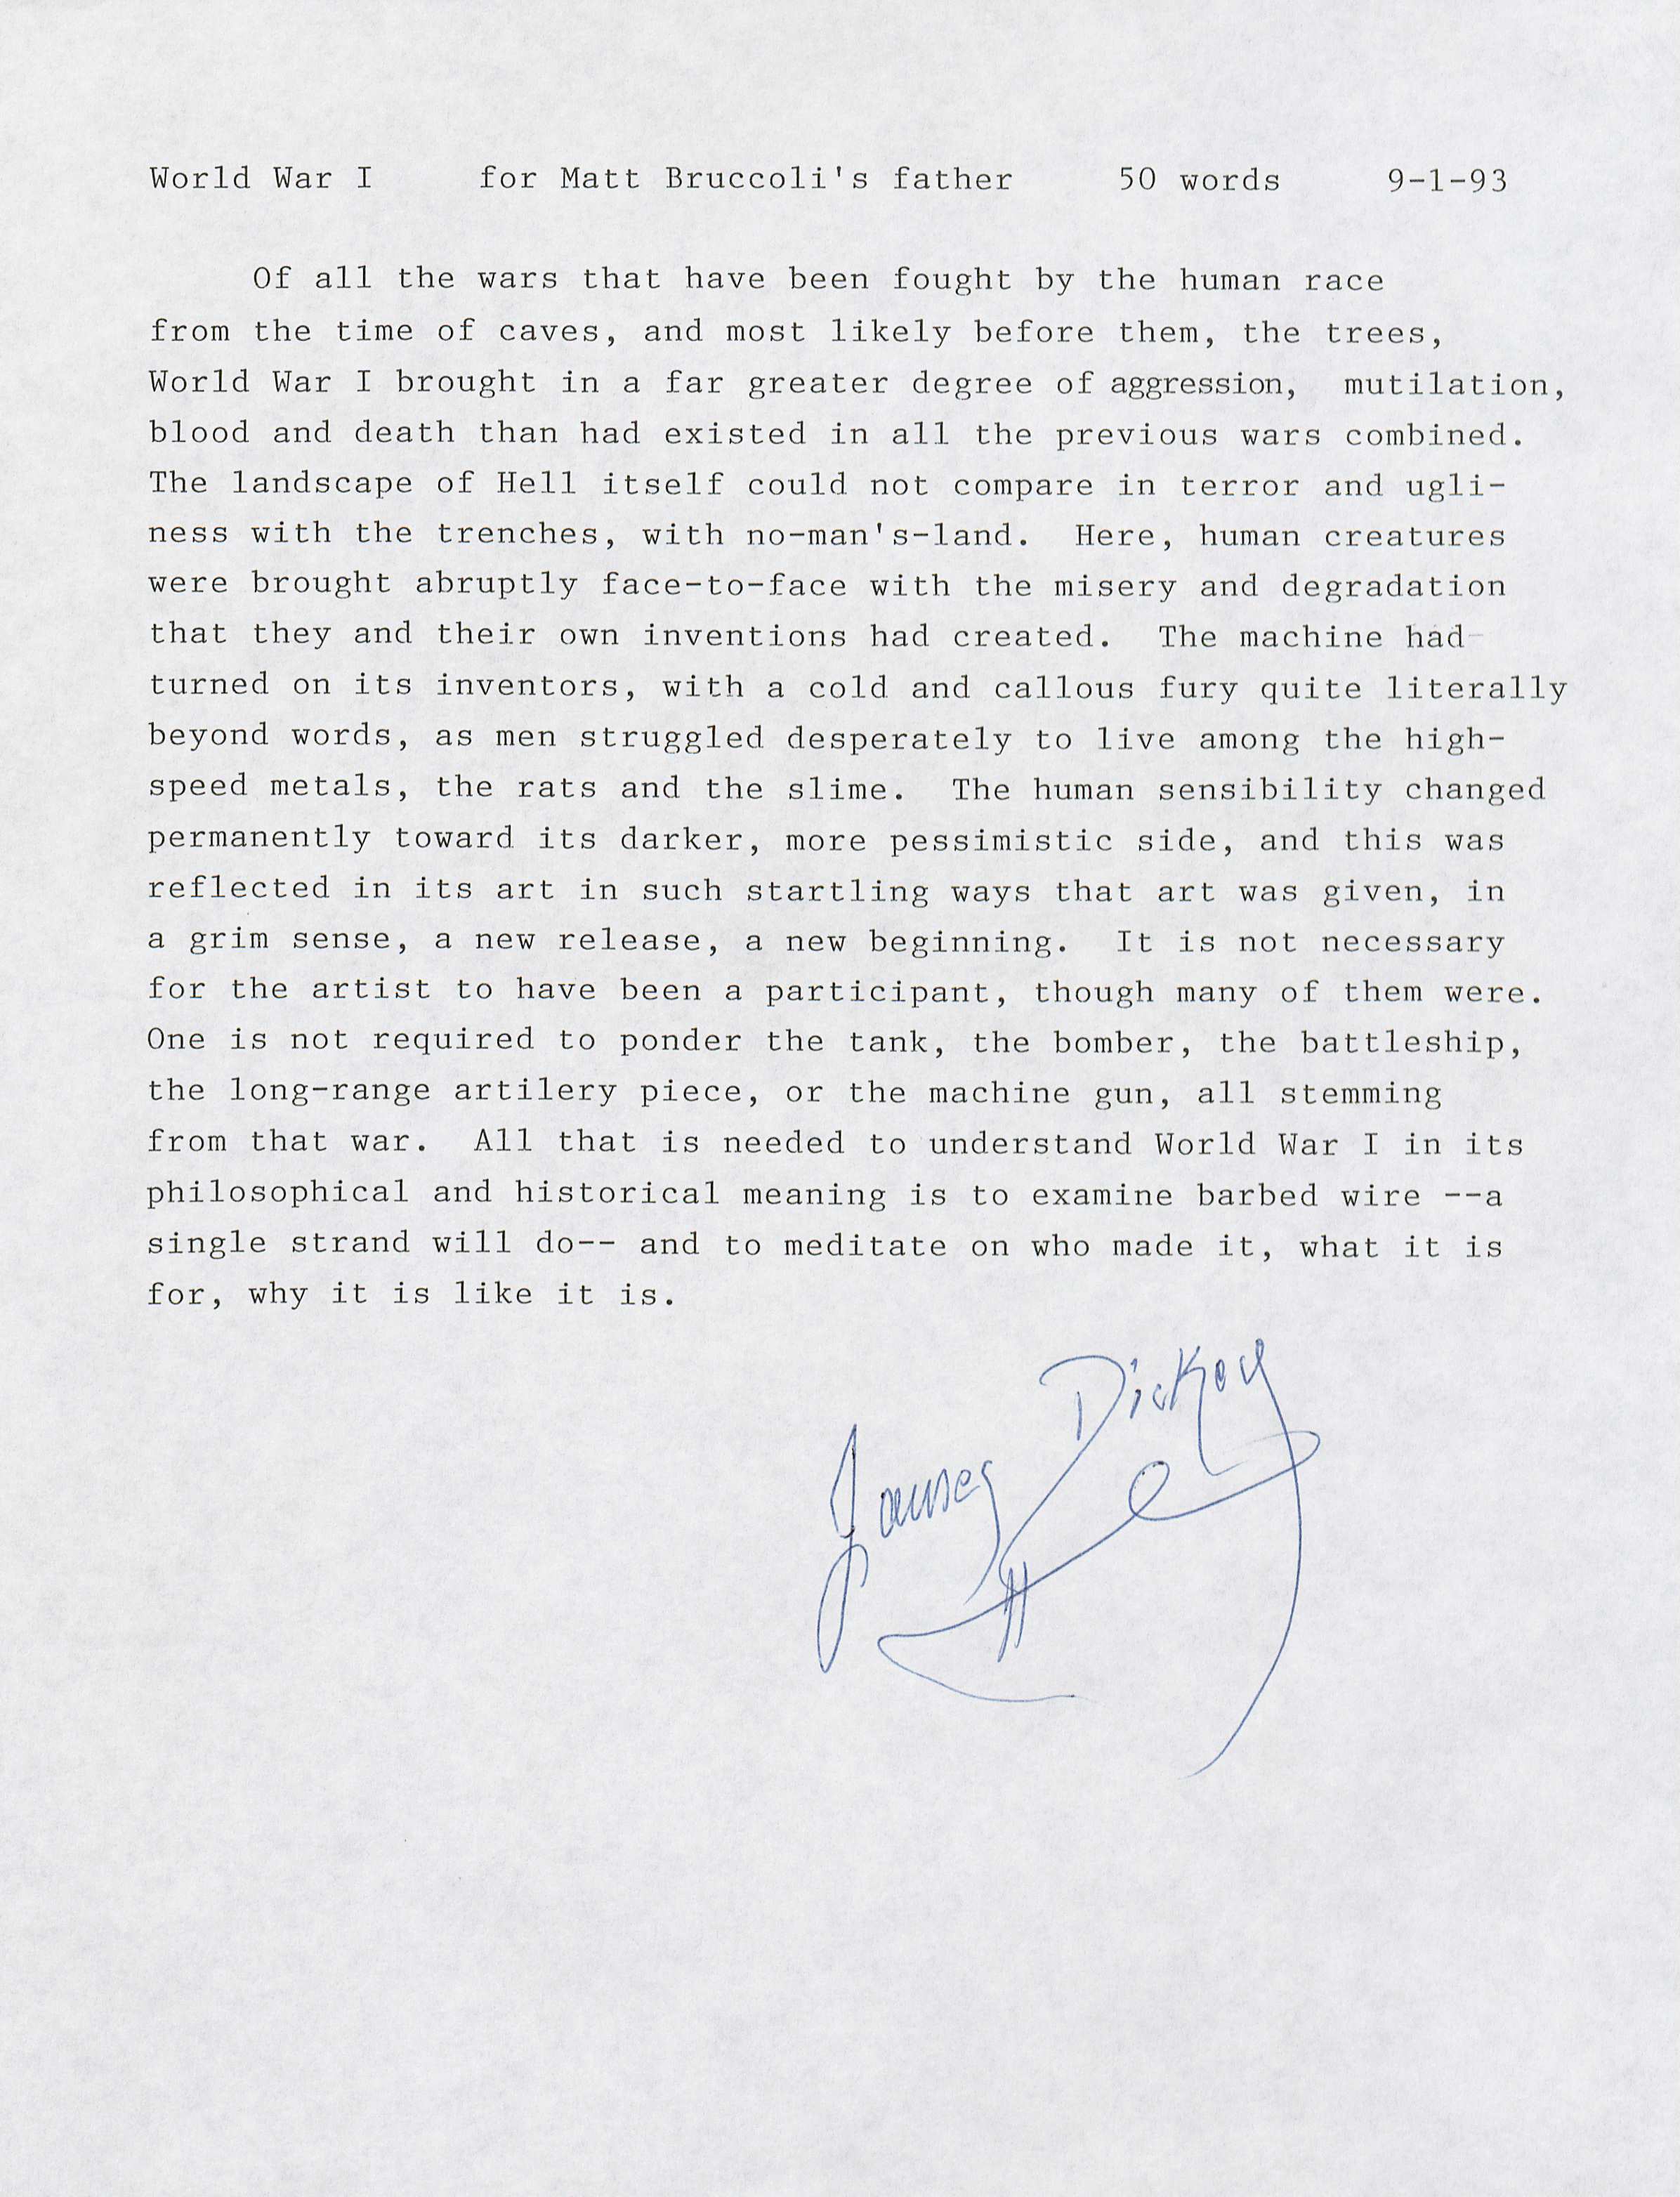 Dickey, James. “For Matt Bruccoli’s Father.” Letter. World War I Memorabilia. (MSS 10875-s) Bruccoli Great War Collection. Gift of Matthew J. Bruccoli, July, 1997  Famous American novelist, James Dickey, through this extremely personal letter, offers a writer’s input on the war. This letter looks beyond the simplicities of propaganda and talk about war’s more virulent nature. This note does not degrade the enemy in any way, but rather looks at the matter from the perspective of a human being to express the atrocities and horrors that war imposes on mankind.  